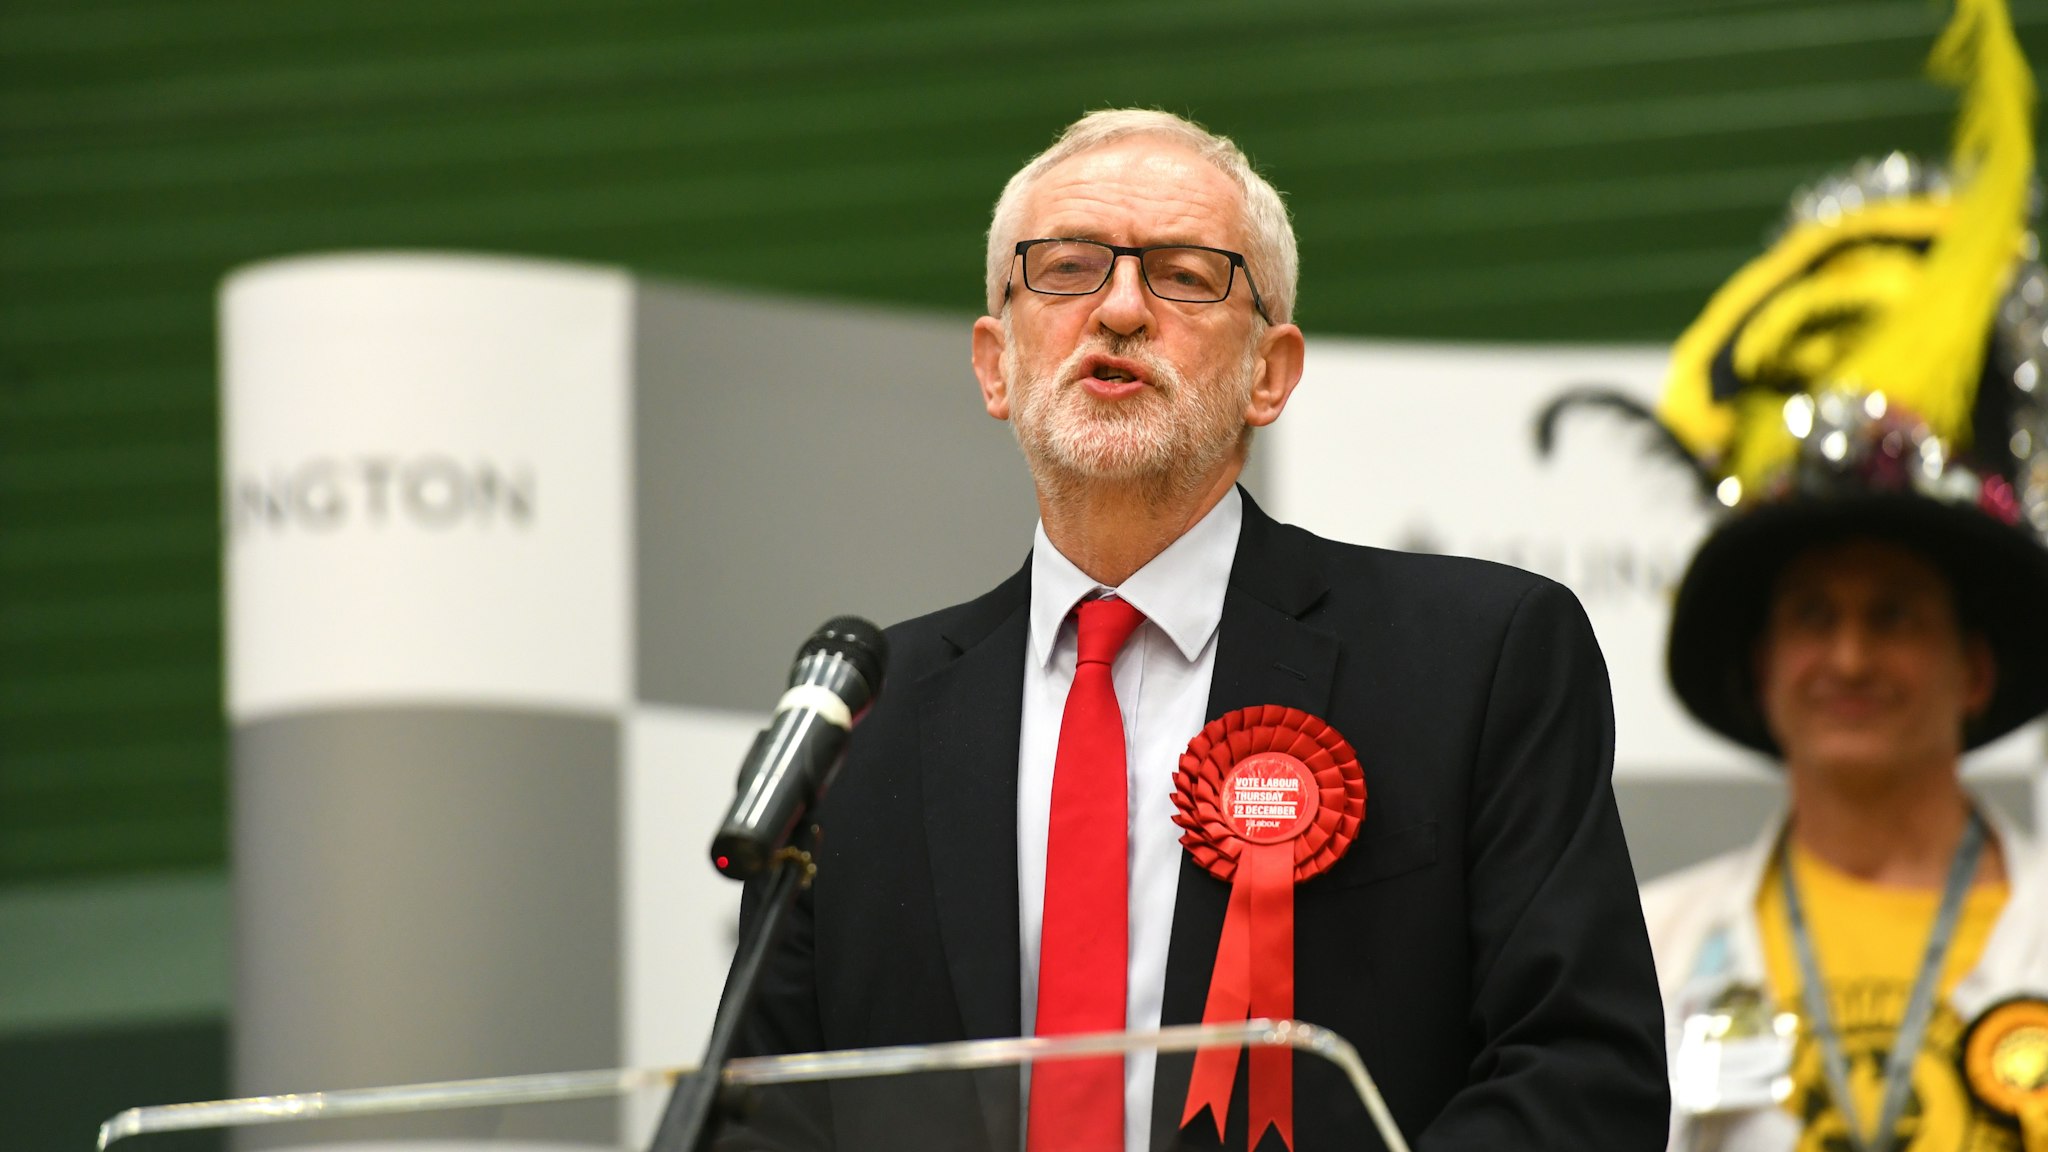 Labour leader Jeremy Corbyn speaks after the results was given at Sobell Leisure Centre for the Islington North constituency for the 2019 General Election.